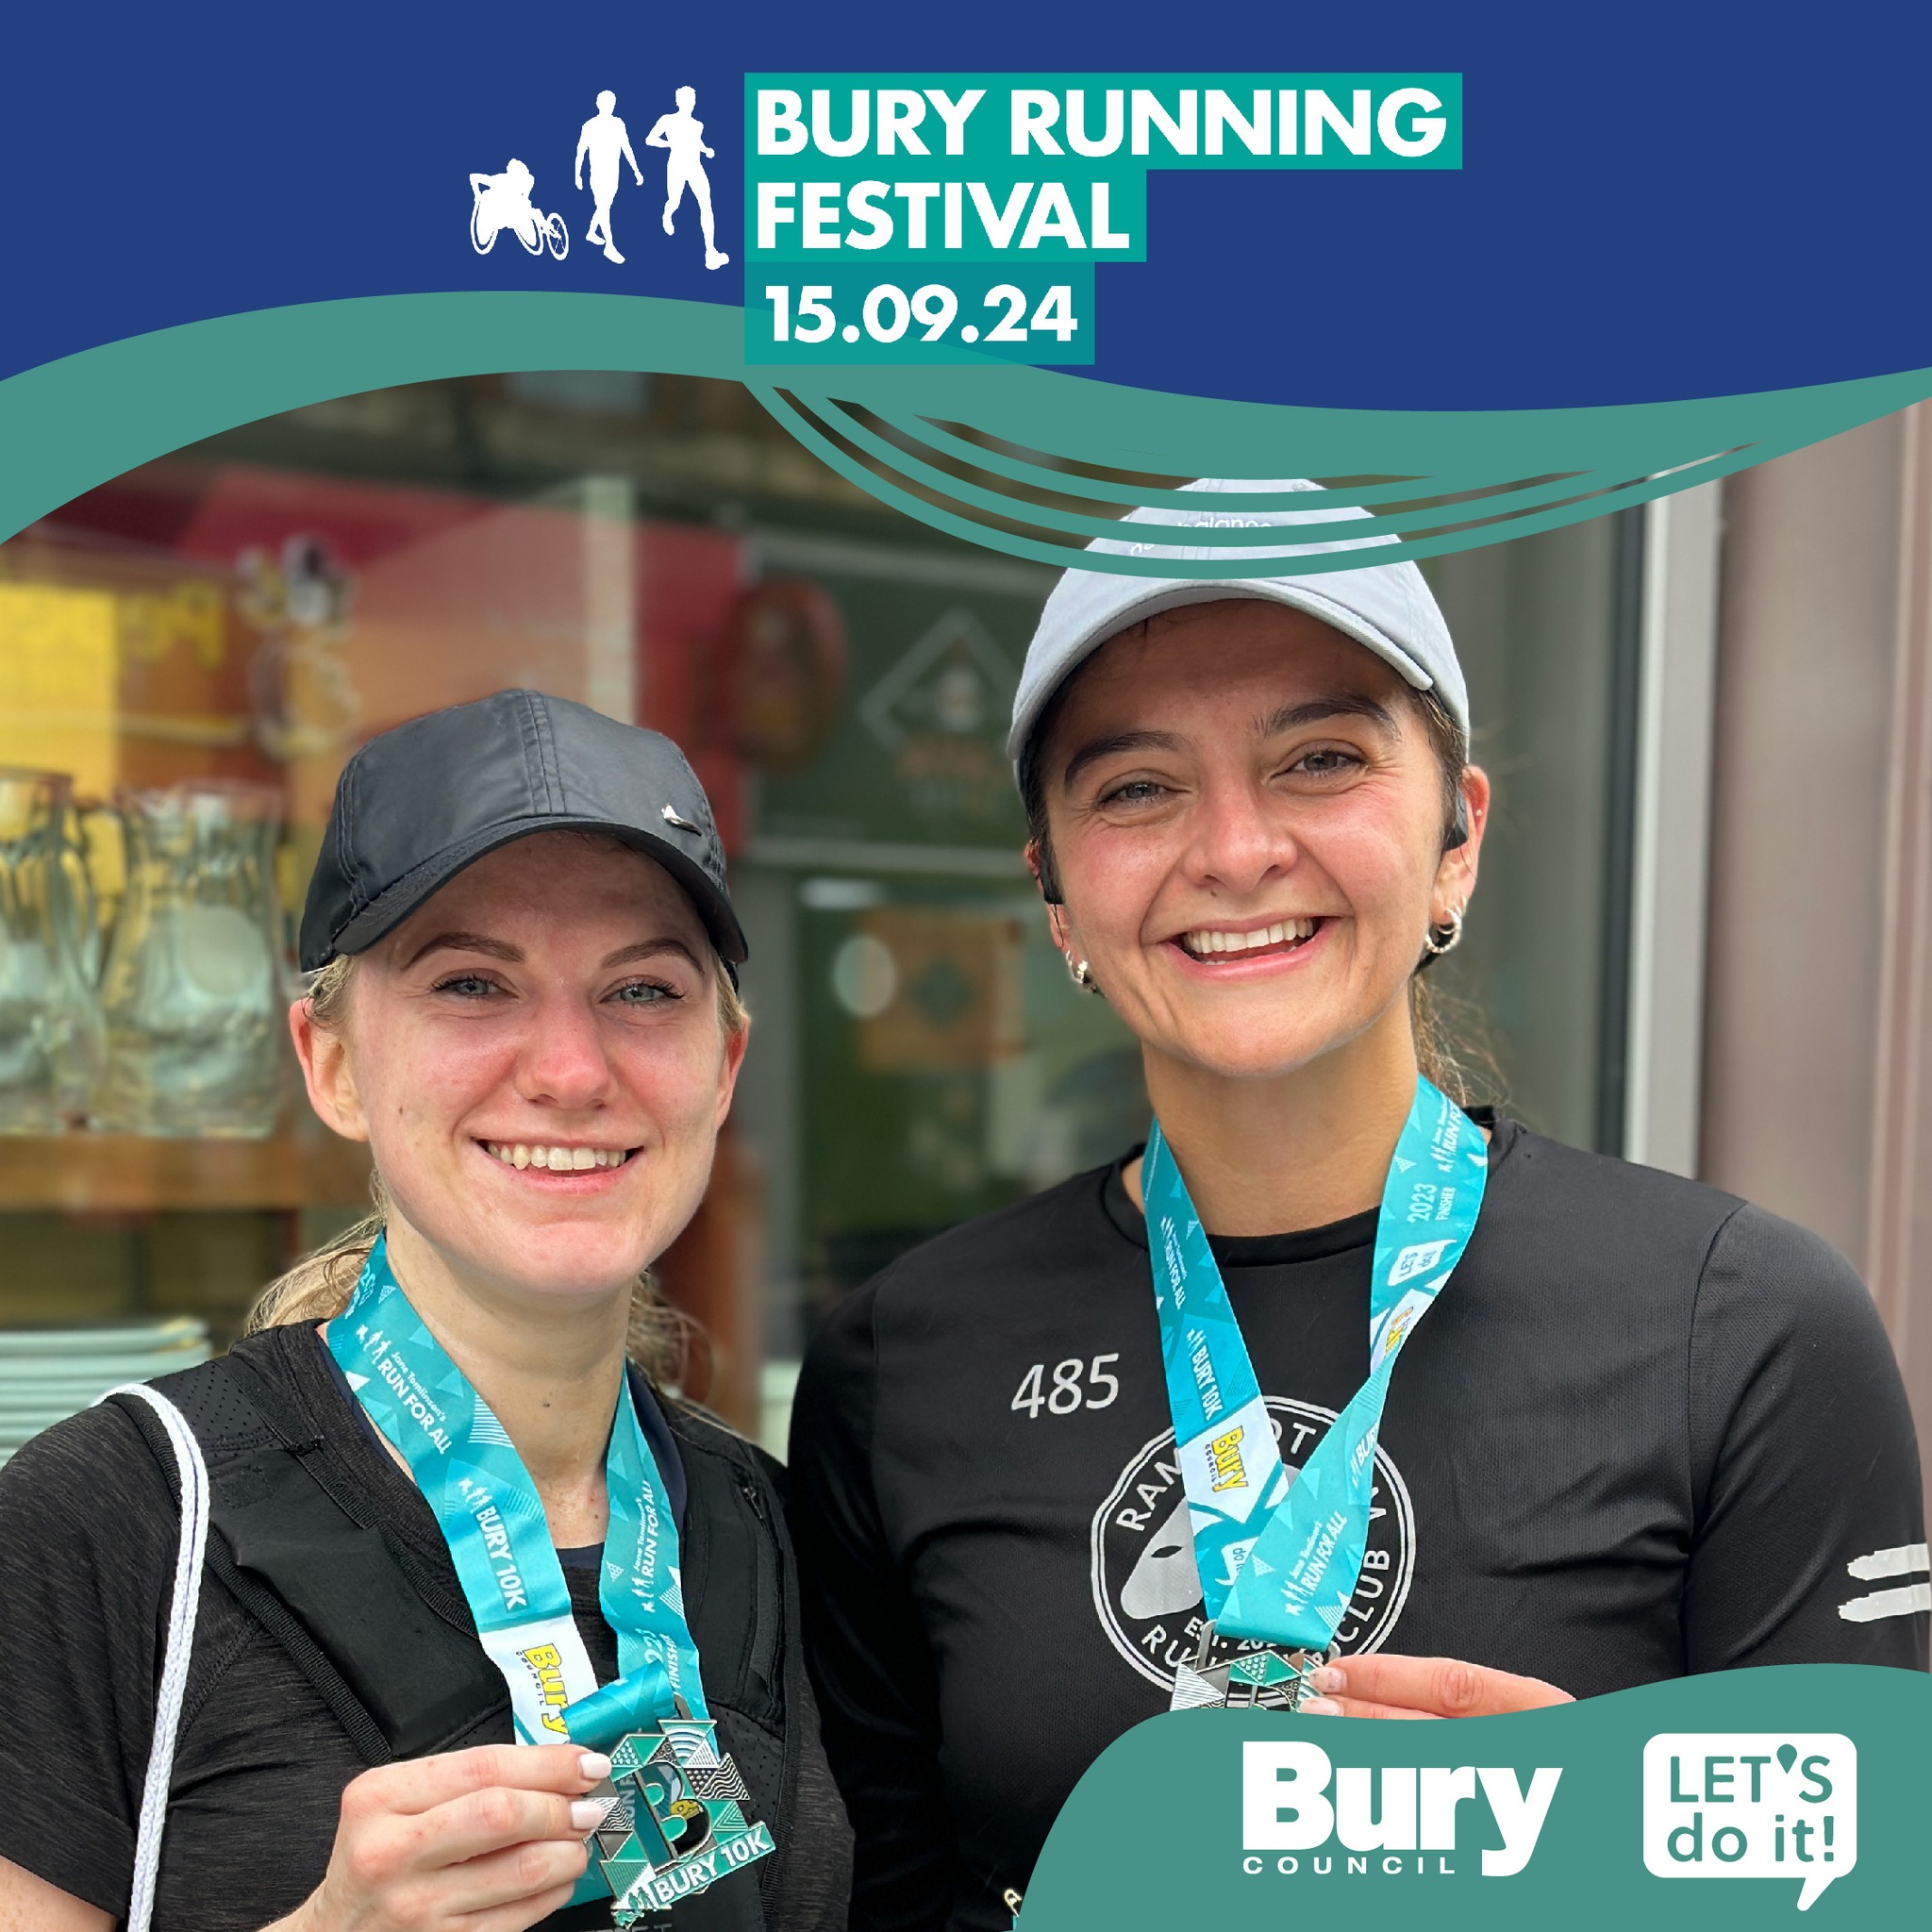 Bury 10k – sign up today